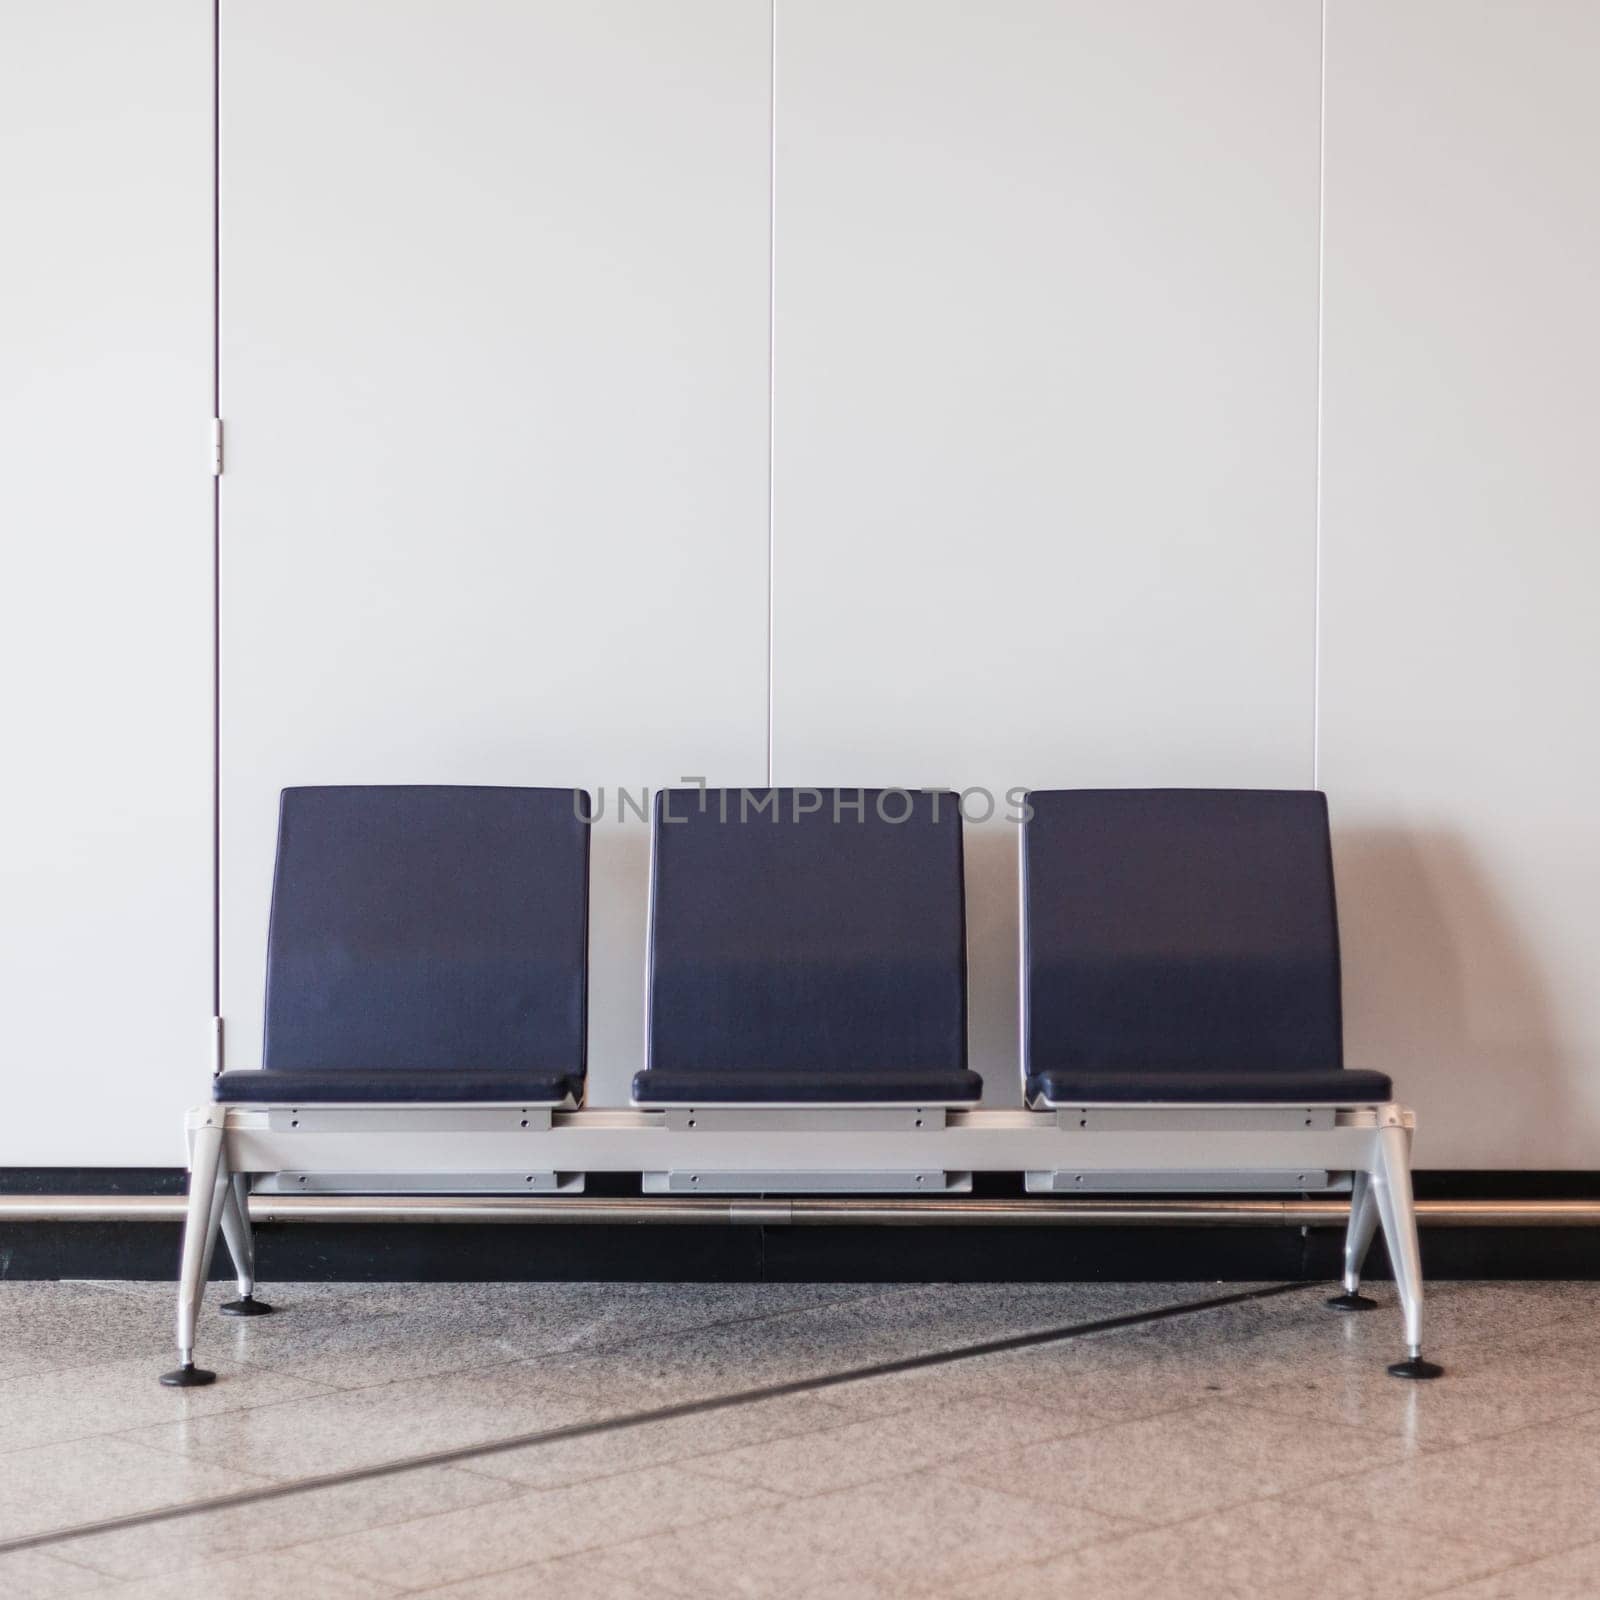 Rectangular chairs lined up against white wall in waiting room by kasto